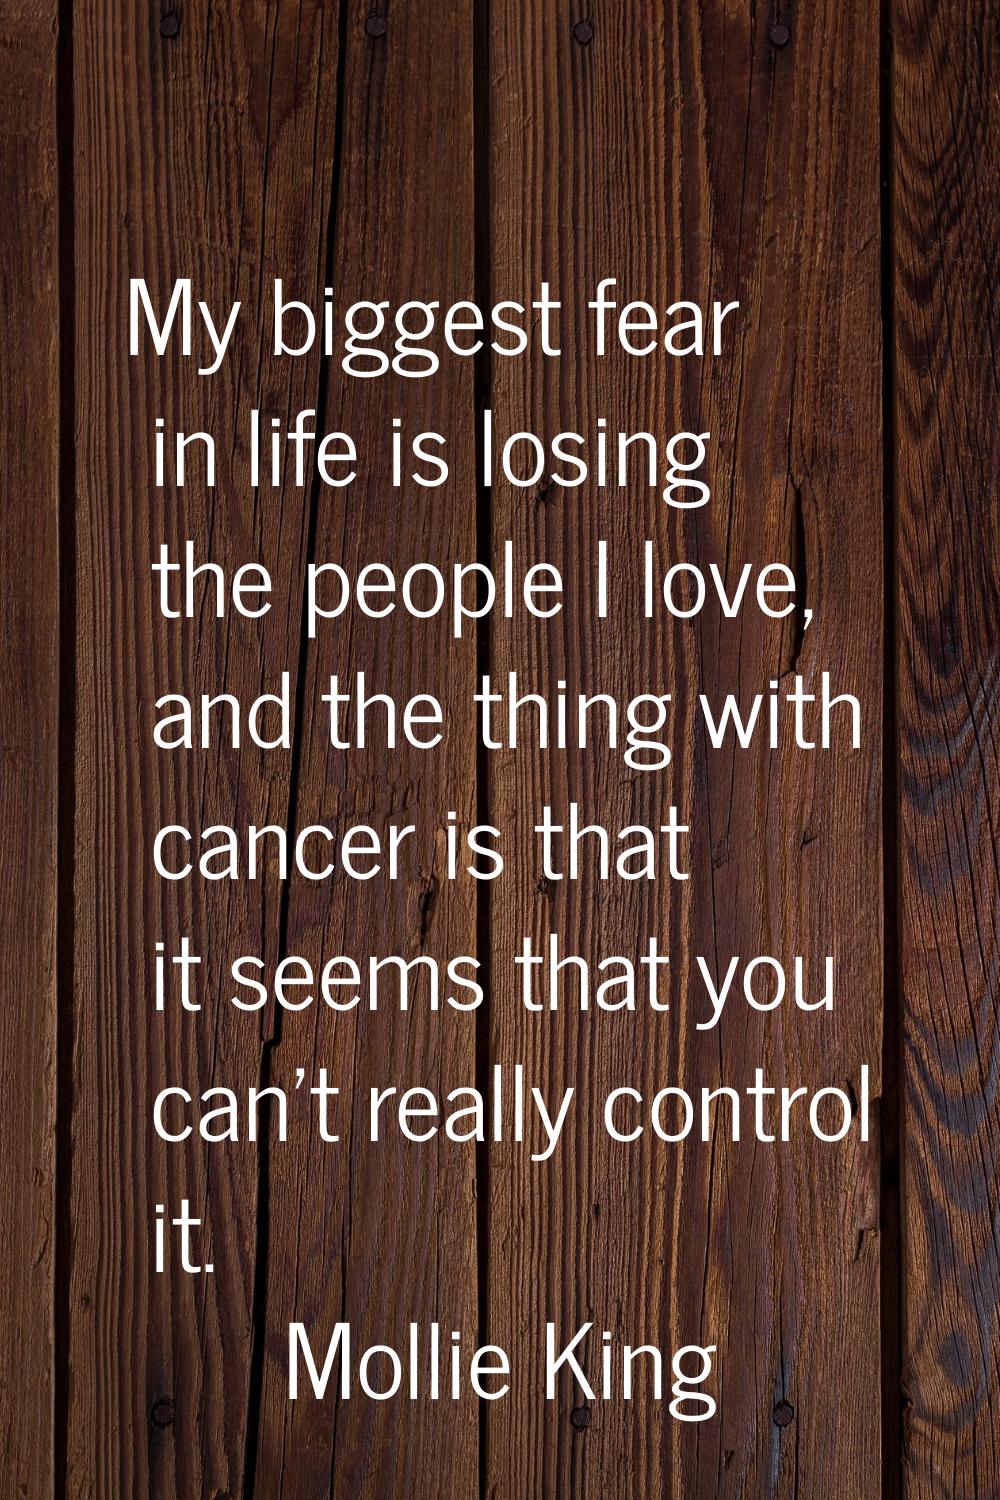 My biggest fear in life is losing the people I love, and the thing with cancer is that it seems tha